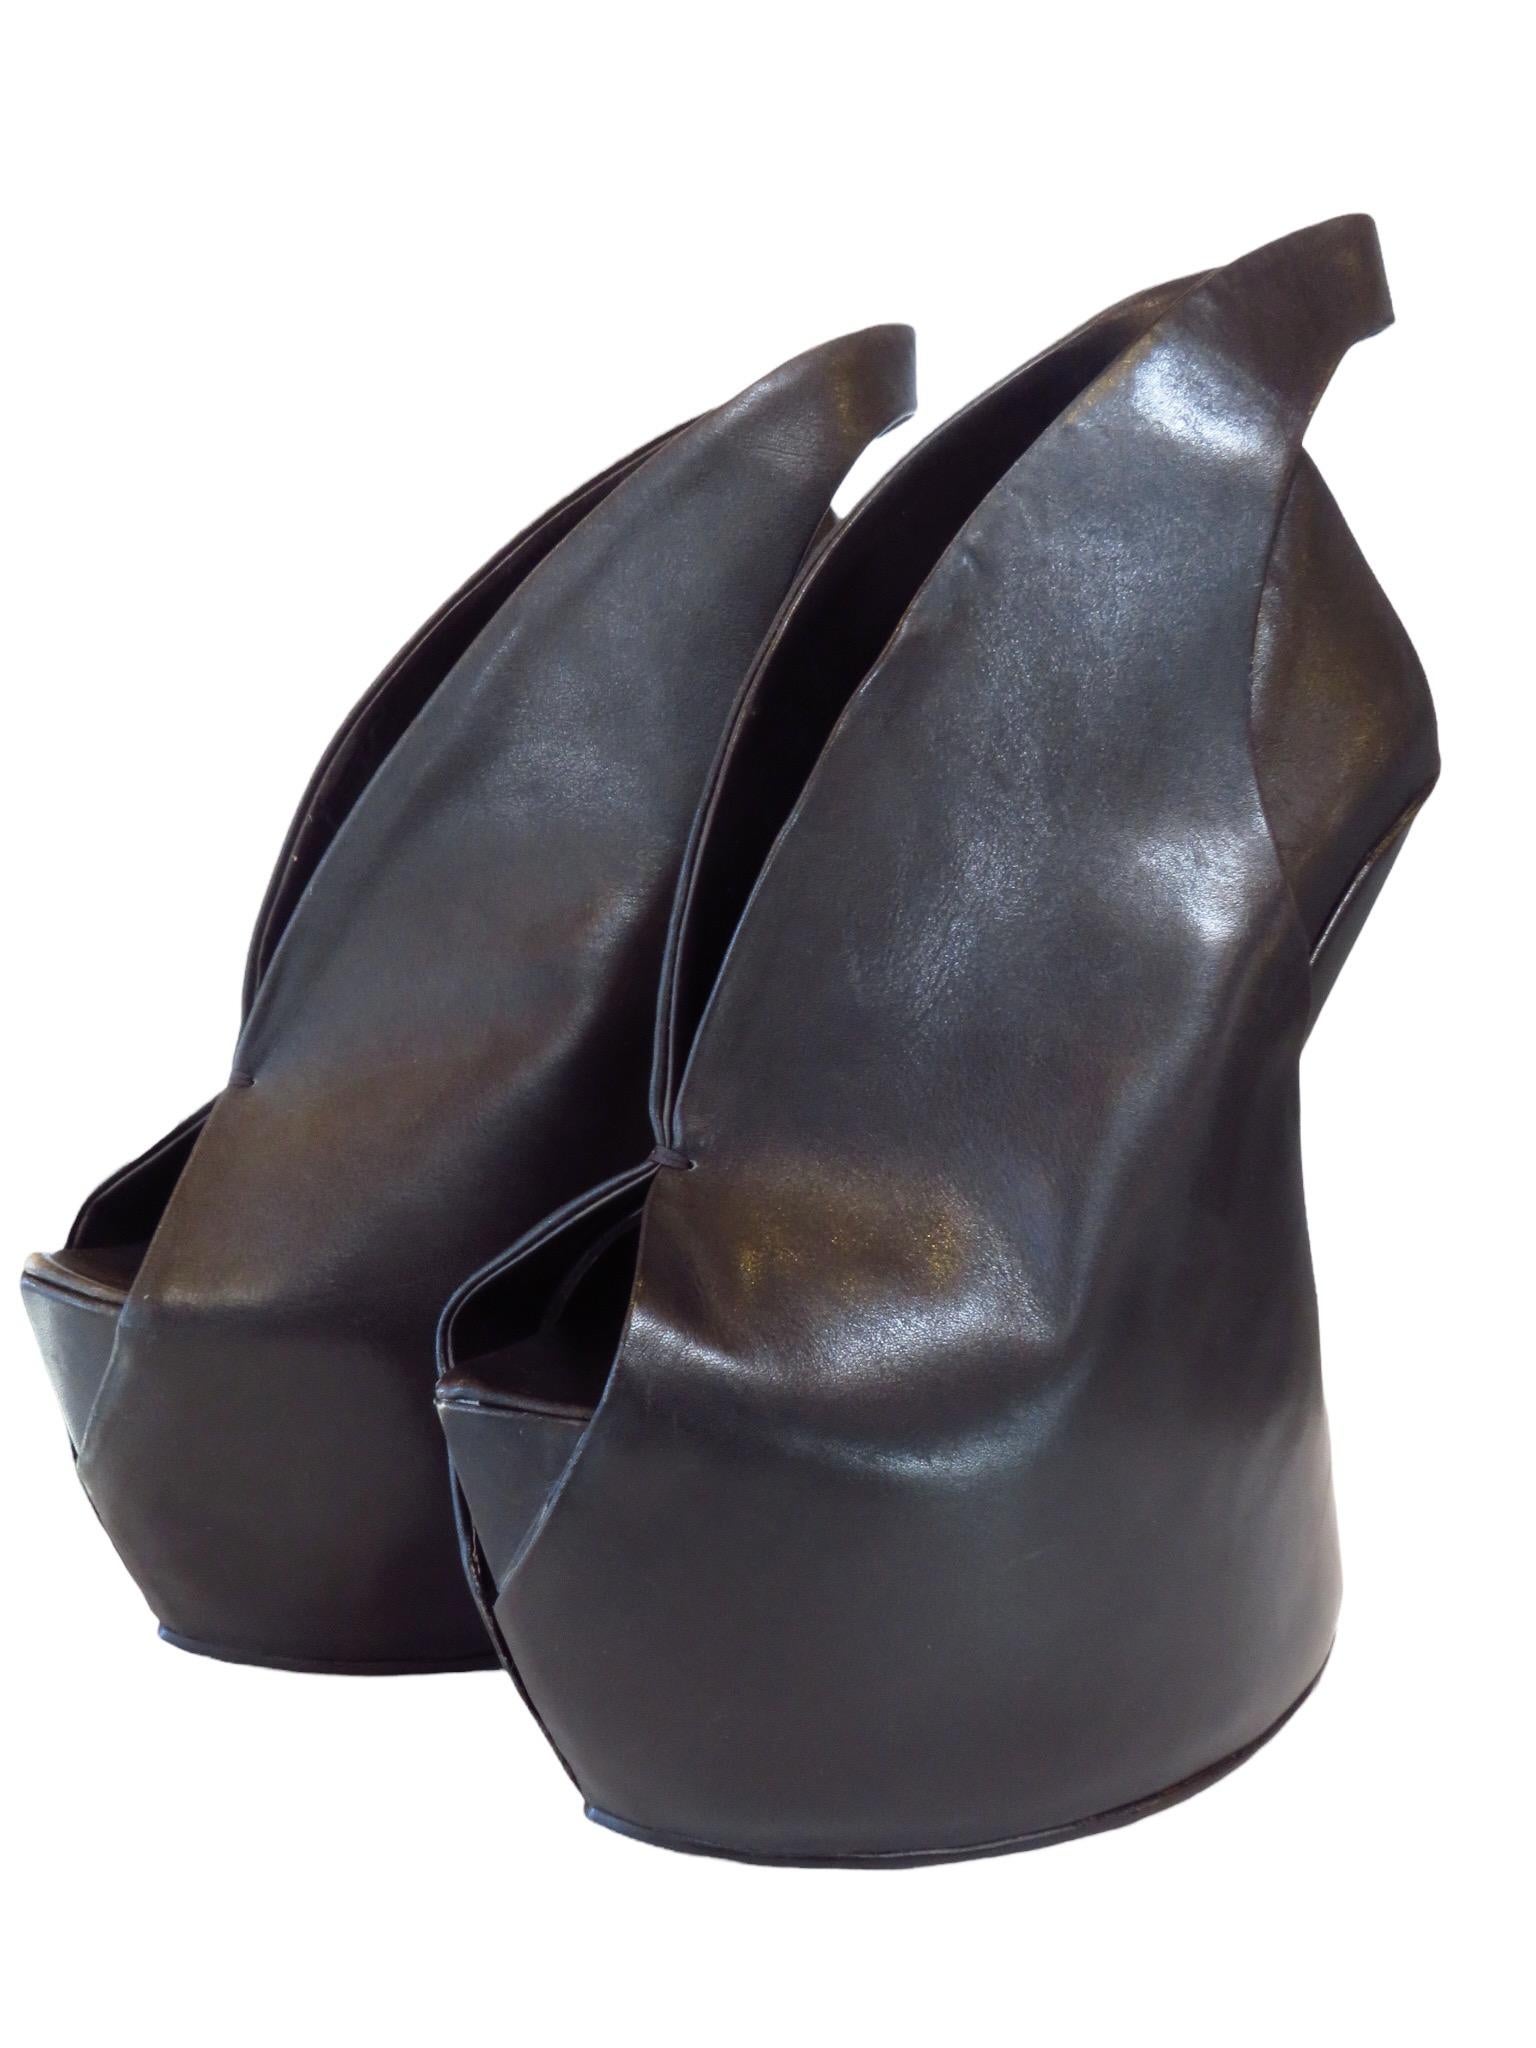 Iris Van Herpen x United Nude Collection Ankle Bootie In New Condition For Sale In Laguna Beach, CA